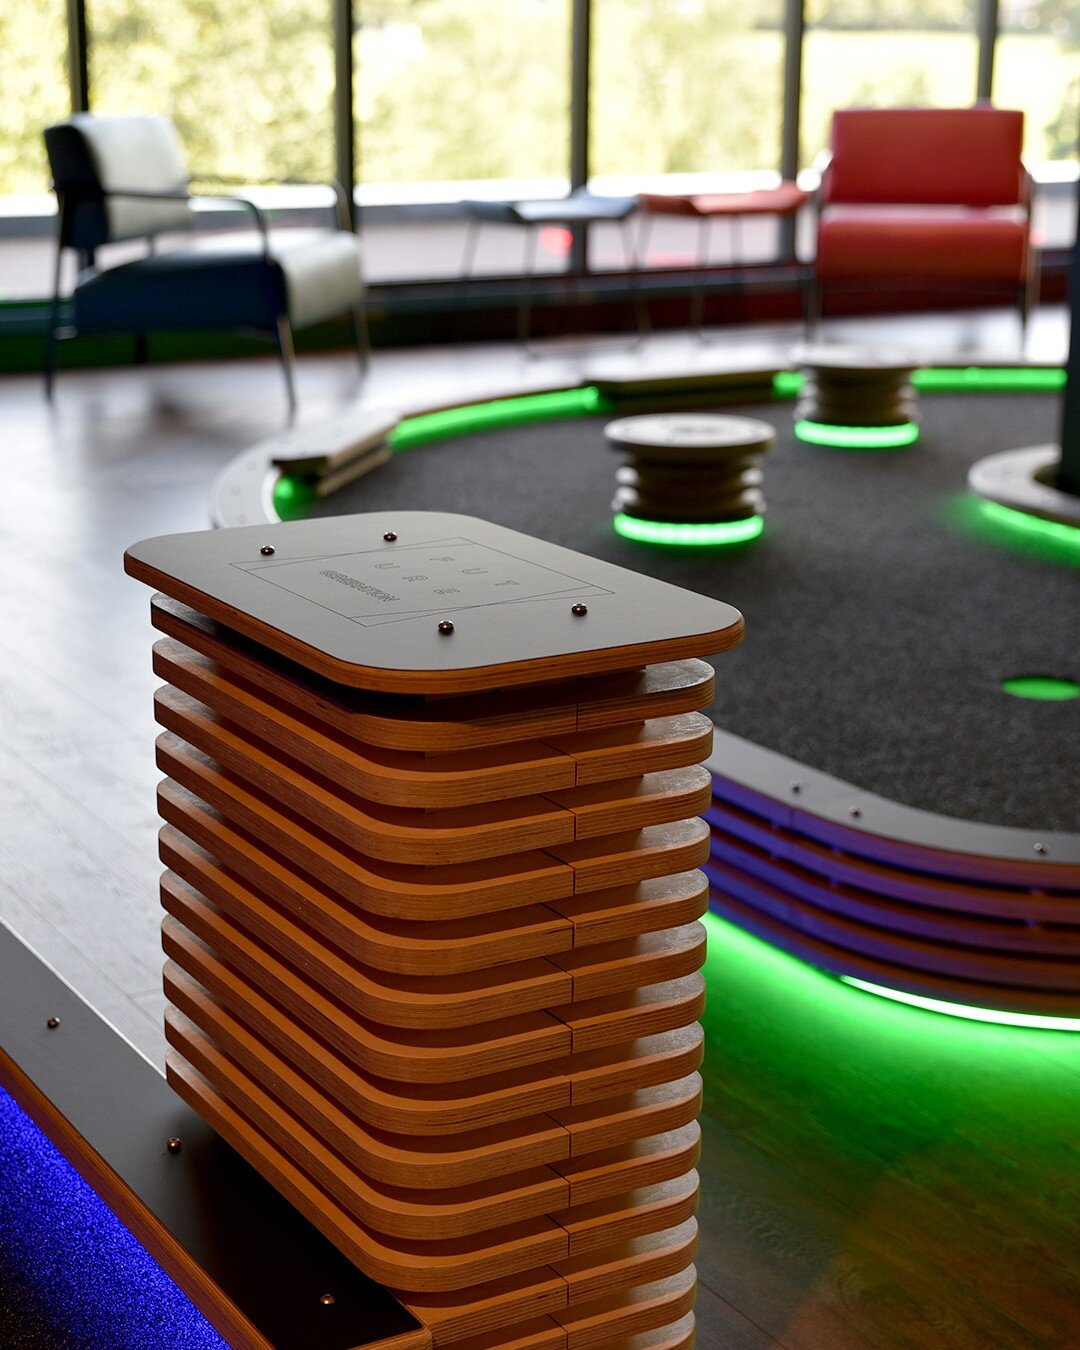 Indoor mini golf is a great social game, known to increase food and drink sales at your venue.

We know this first hand at our Instaputt HQ. Every hole is beautifully designed to make your space look good.

#instaputt #instaputtuk #bespokedesign #dri